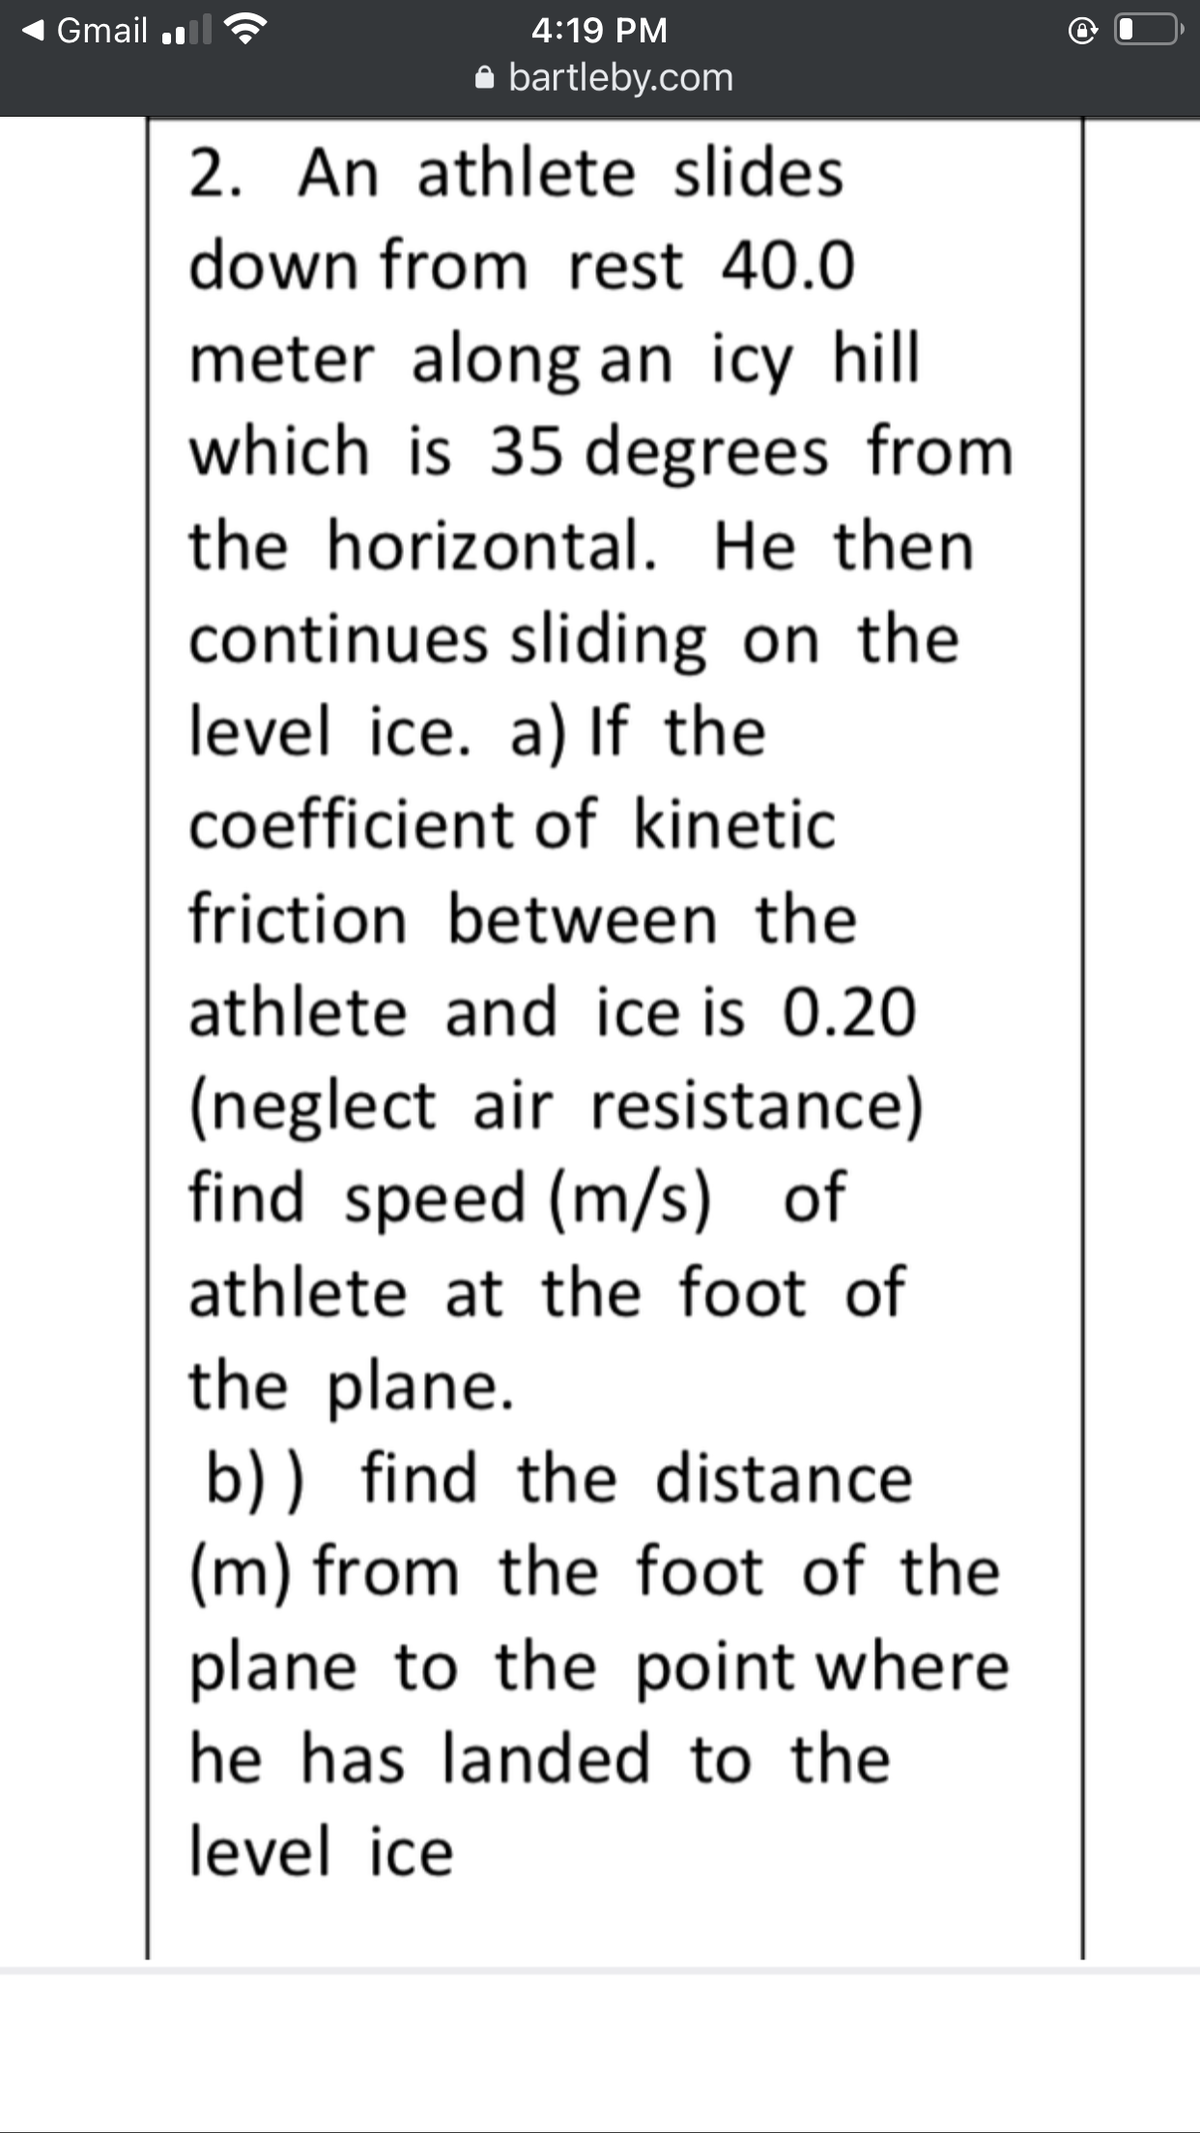 Gmail
4:19 PM
bartleby.com
2. An athlete slides
down from rest 40.0
meter along an icy hill
which is 35 degrees from
the horizontal. He then
continues sliding on the
level ice. a) If the
coefficient of kinetic
friction between the
athlete and ice is 0.20
(neglect air resistance)
find speed (m/s) of
athlete at the foot of
the plane.
b) ) find the distance
(m) from the foot of the
plane to the point where
he has landed to the
level ice
